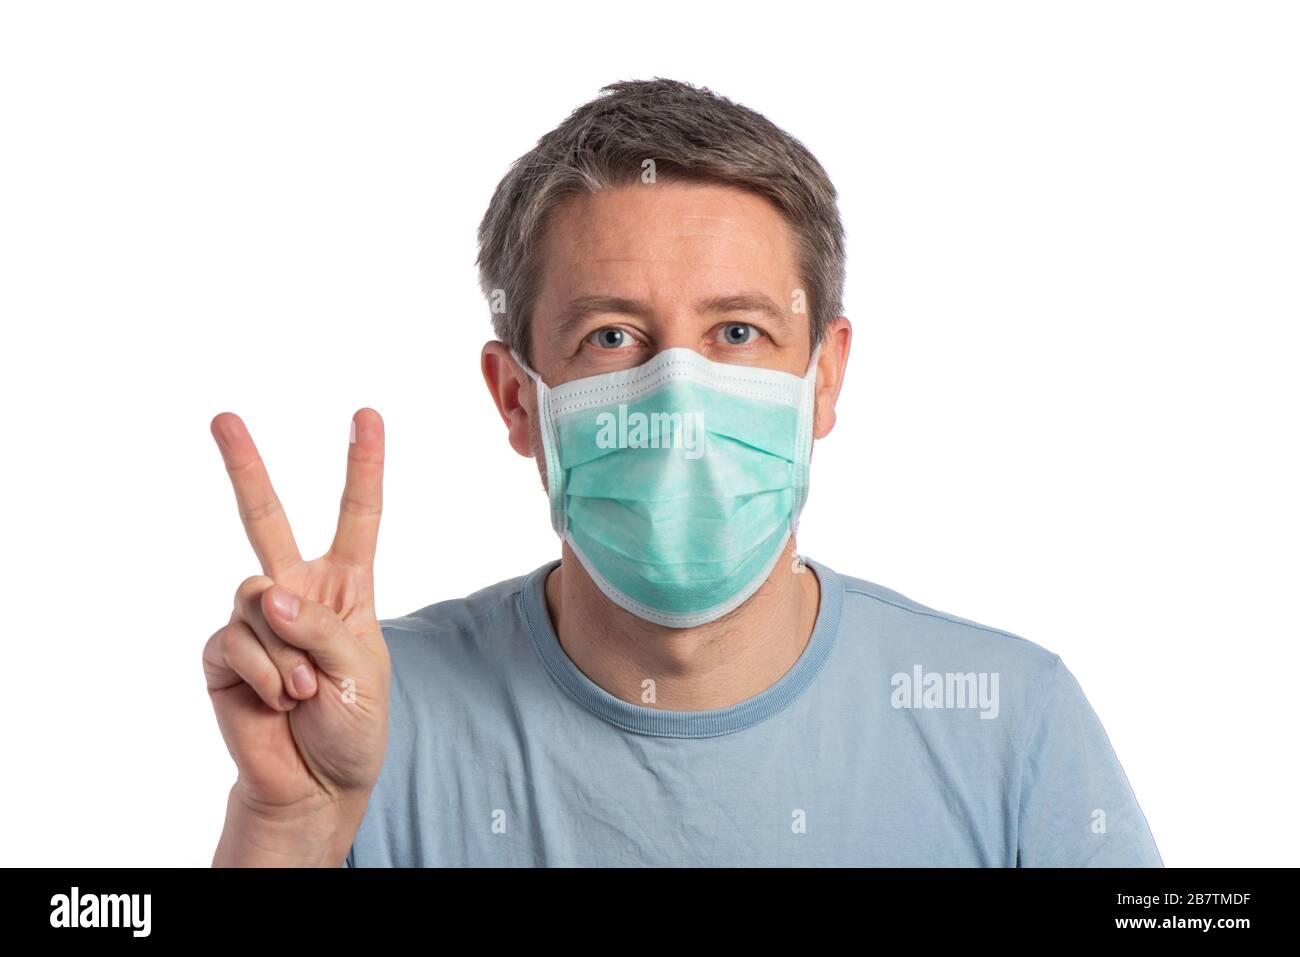 Caucasian man wearing a protection mask and making vistory sign with protective gloves on a white background Stock Photo